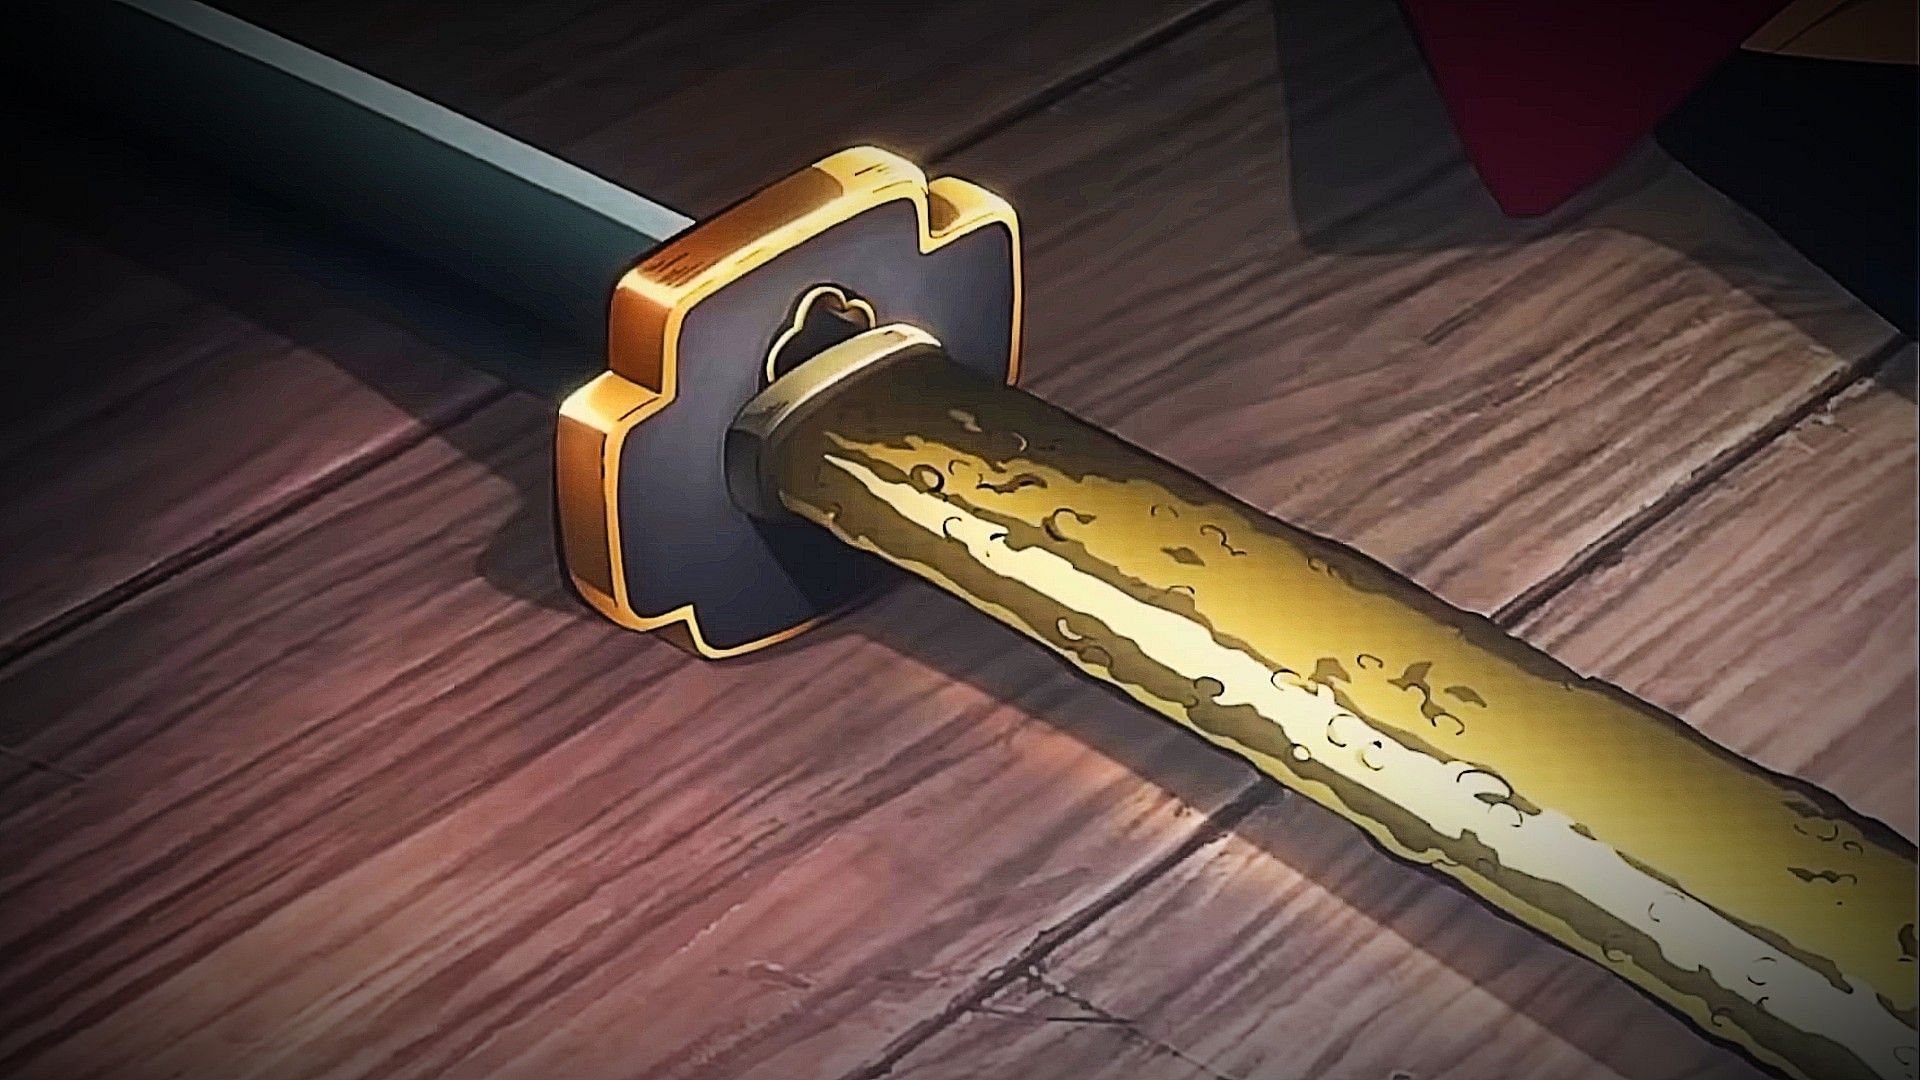 The 300-year-old sword in Demon Slayer season 3 episode 2, explained